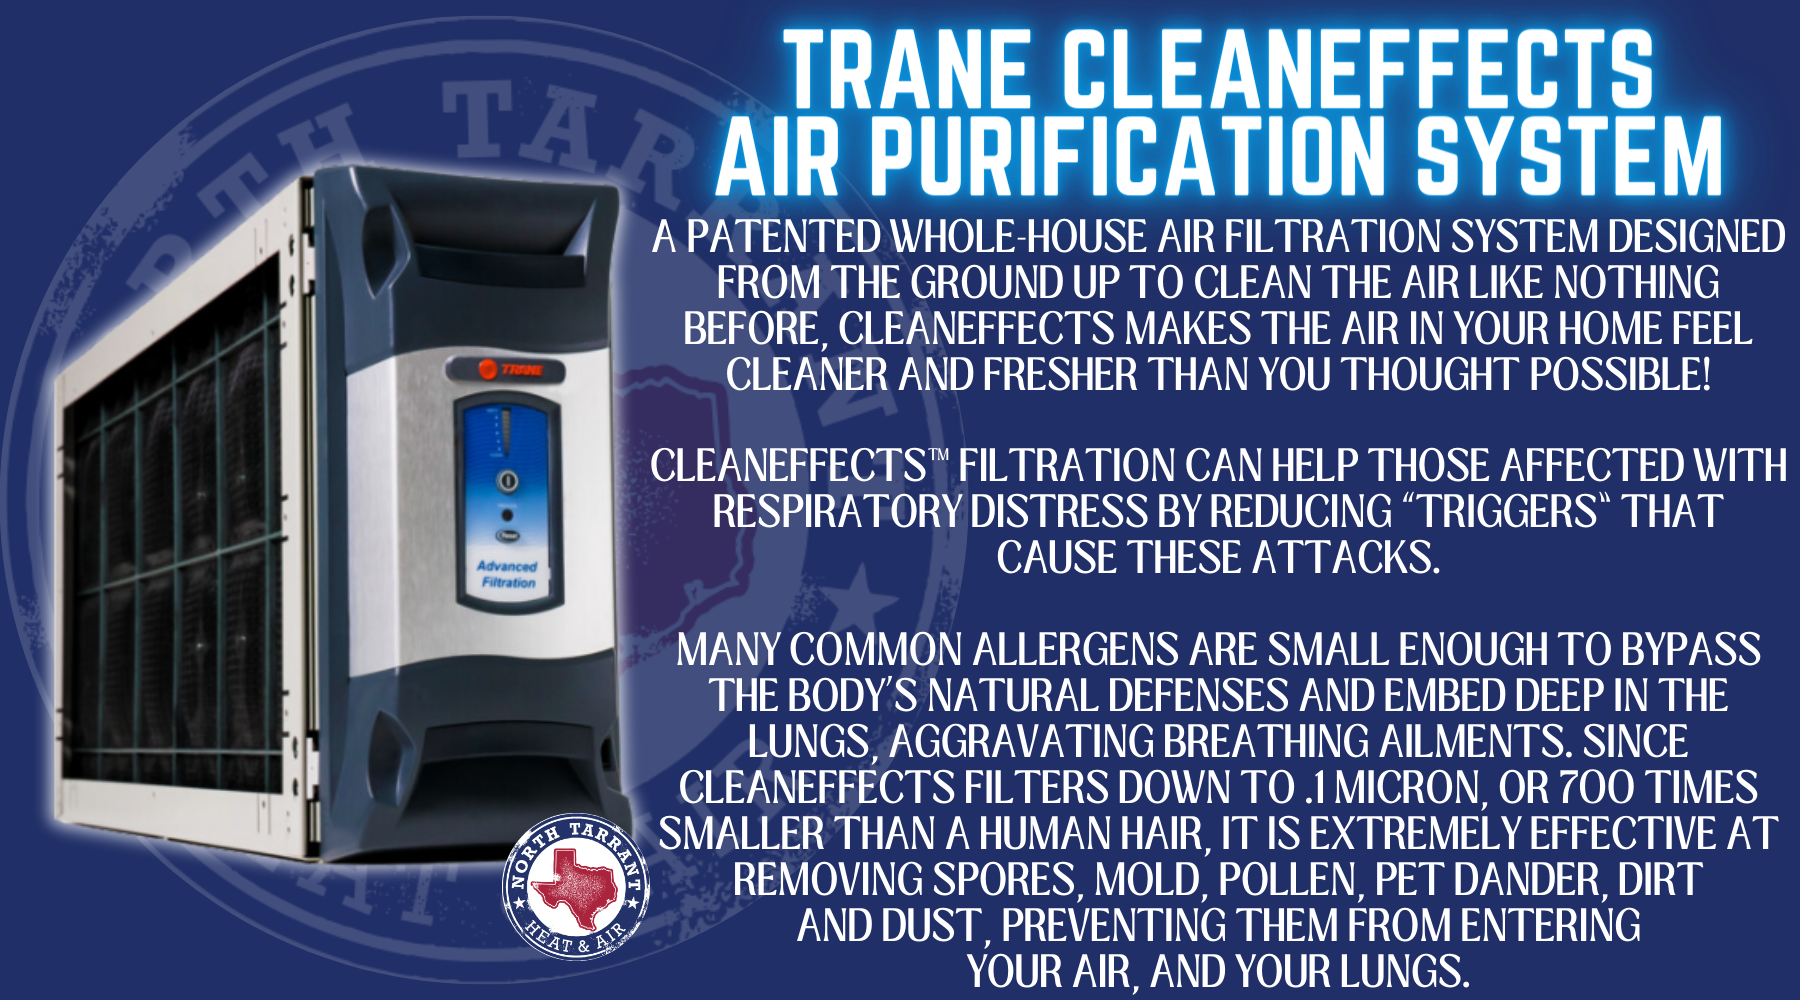 a patented whole-house air filtration system Designed from the ground up to clean the air like nothing before, CleanEffects makes the air in your home feel cleaner and fresher than you thought possible! CleanEffects™ filtration can help those affected with respiratory distress by reducing “triggers” that cause these attacks. Many common allergens are small enough to bypass the body’s natural defenses and embed deep in the lungs, aggravating breathing ailments. Since CleanEffects filters down to .1 micron, or 700 times smaller than a human hair, it is extremely effective at removing spores, mold, pollen, pet dander, dirt and dust, preventing them from entering your air, and your lungs.